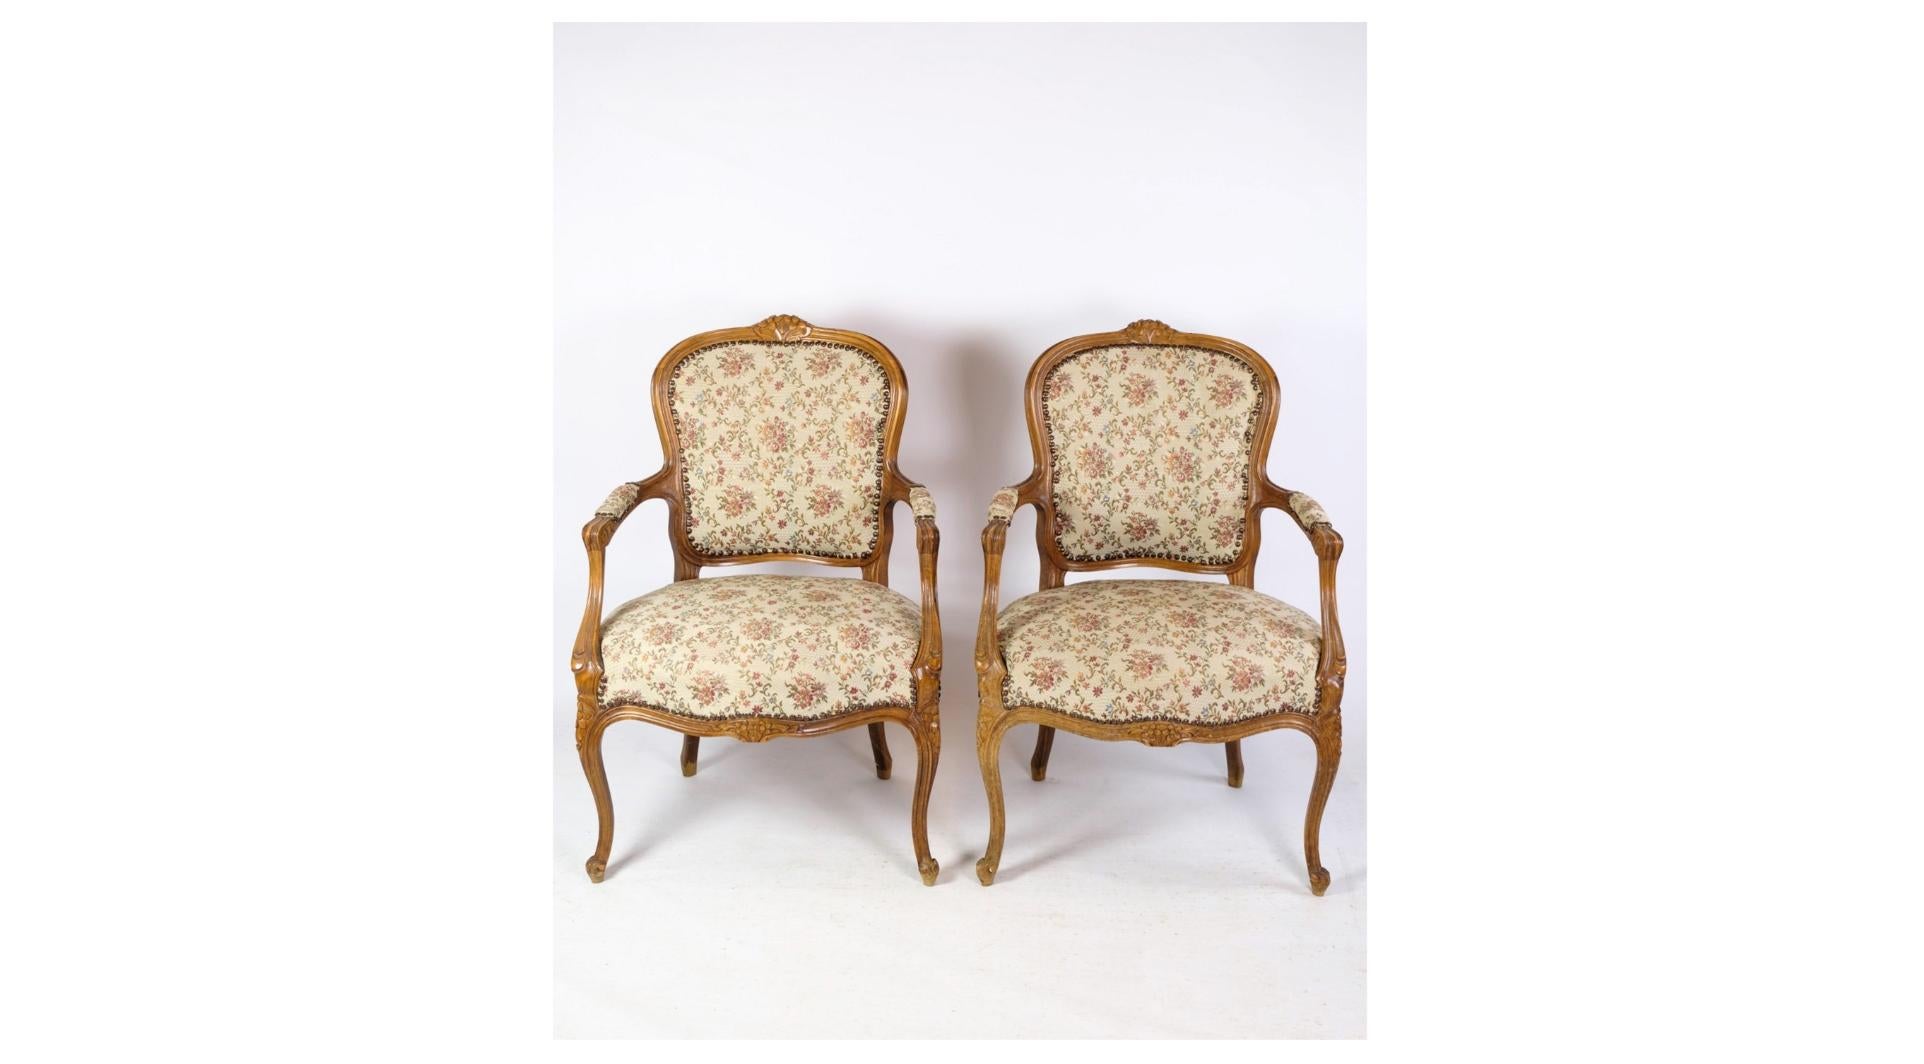 A pair of neo-rococo armchairs with decorative light wood fabric from around the 1930s is a beautiful representation of early 20th century furniture design and aesthetics. These chairs combine elegance and sophistication with a subtle lightness and